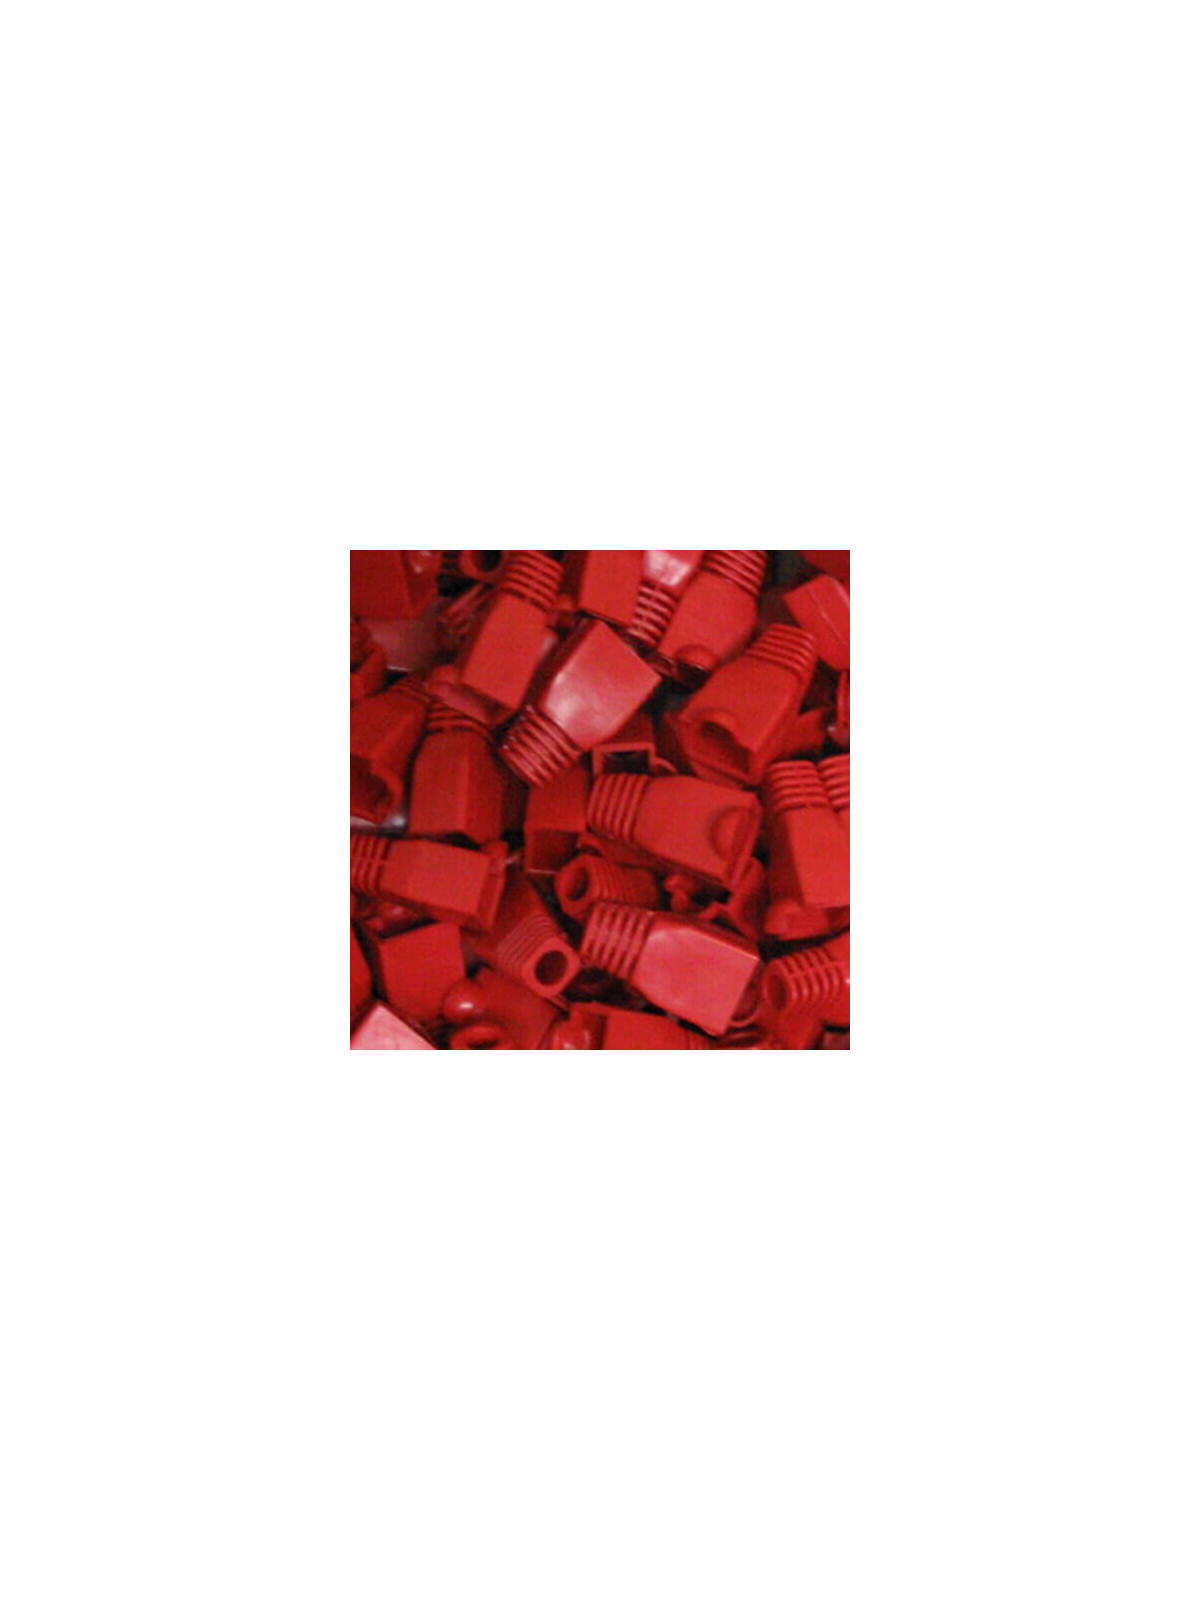 Protector cable red RJ45 Rojo